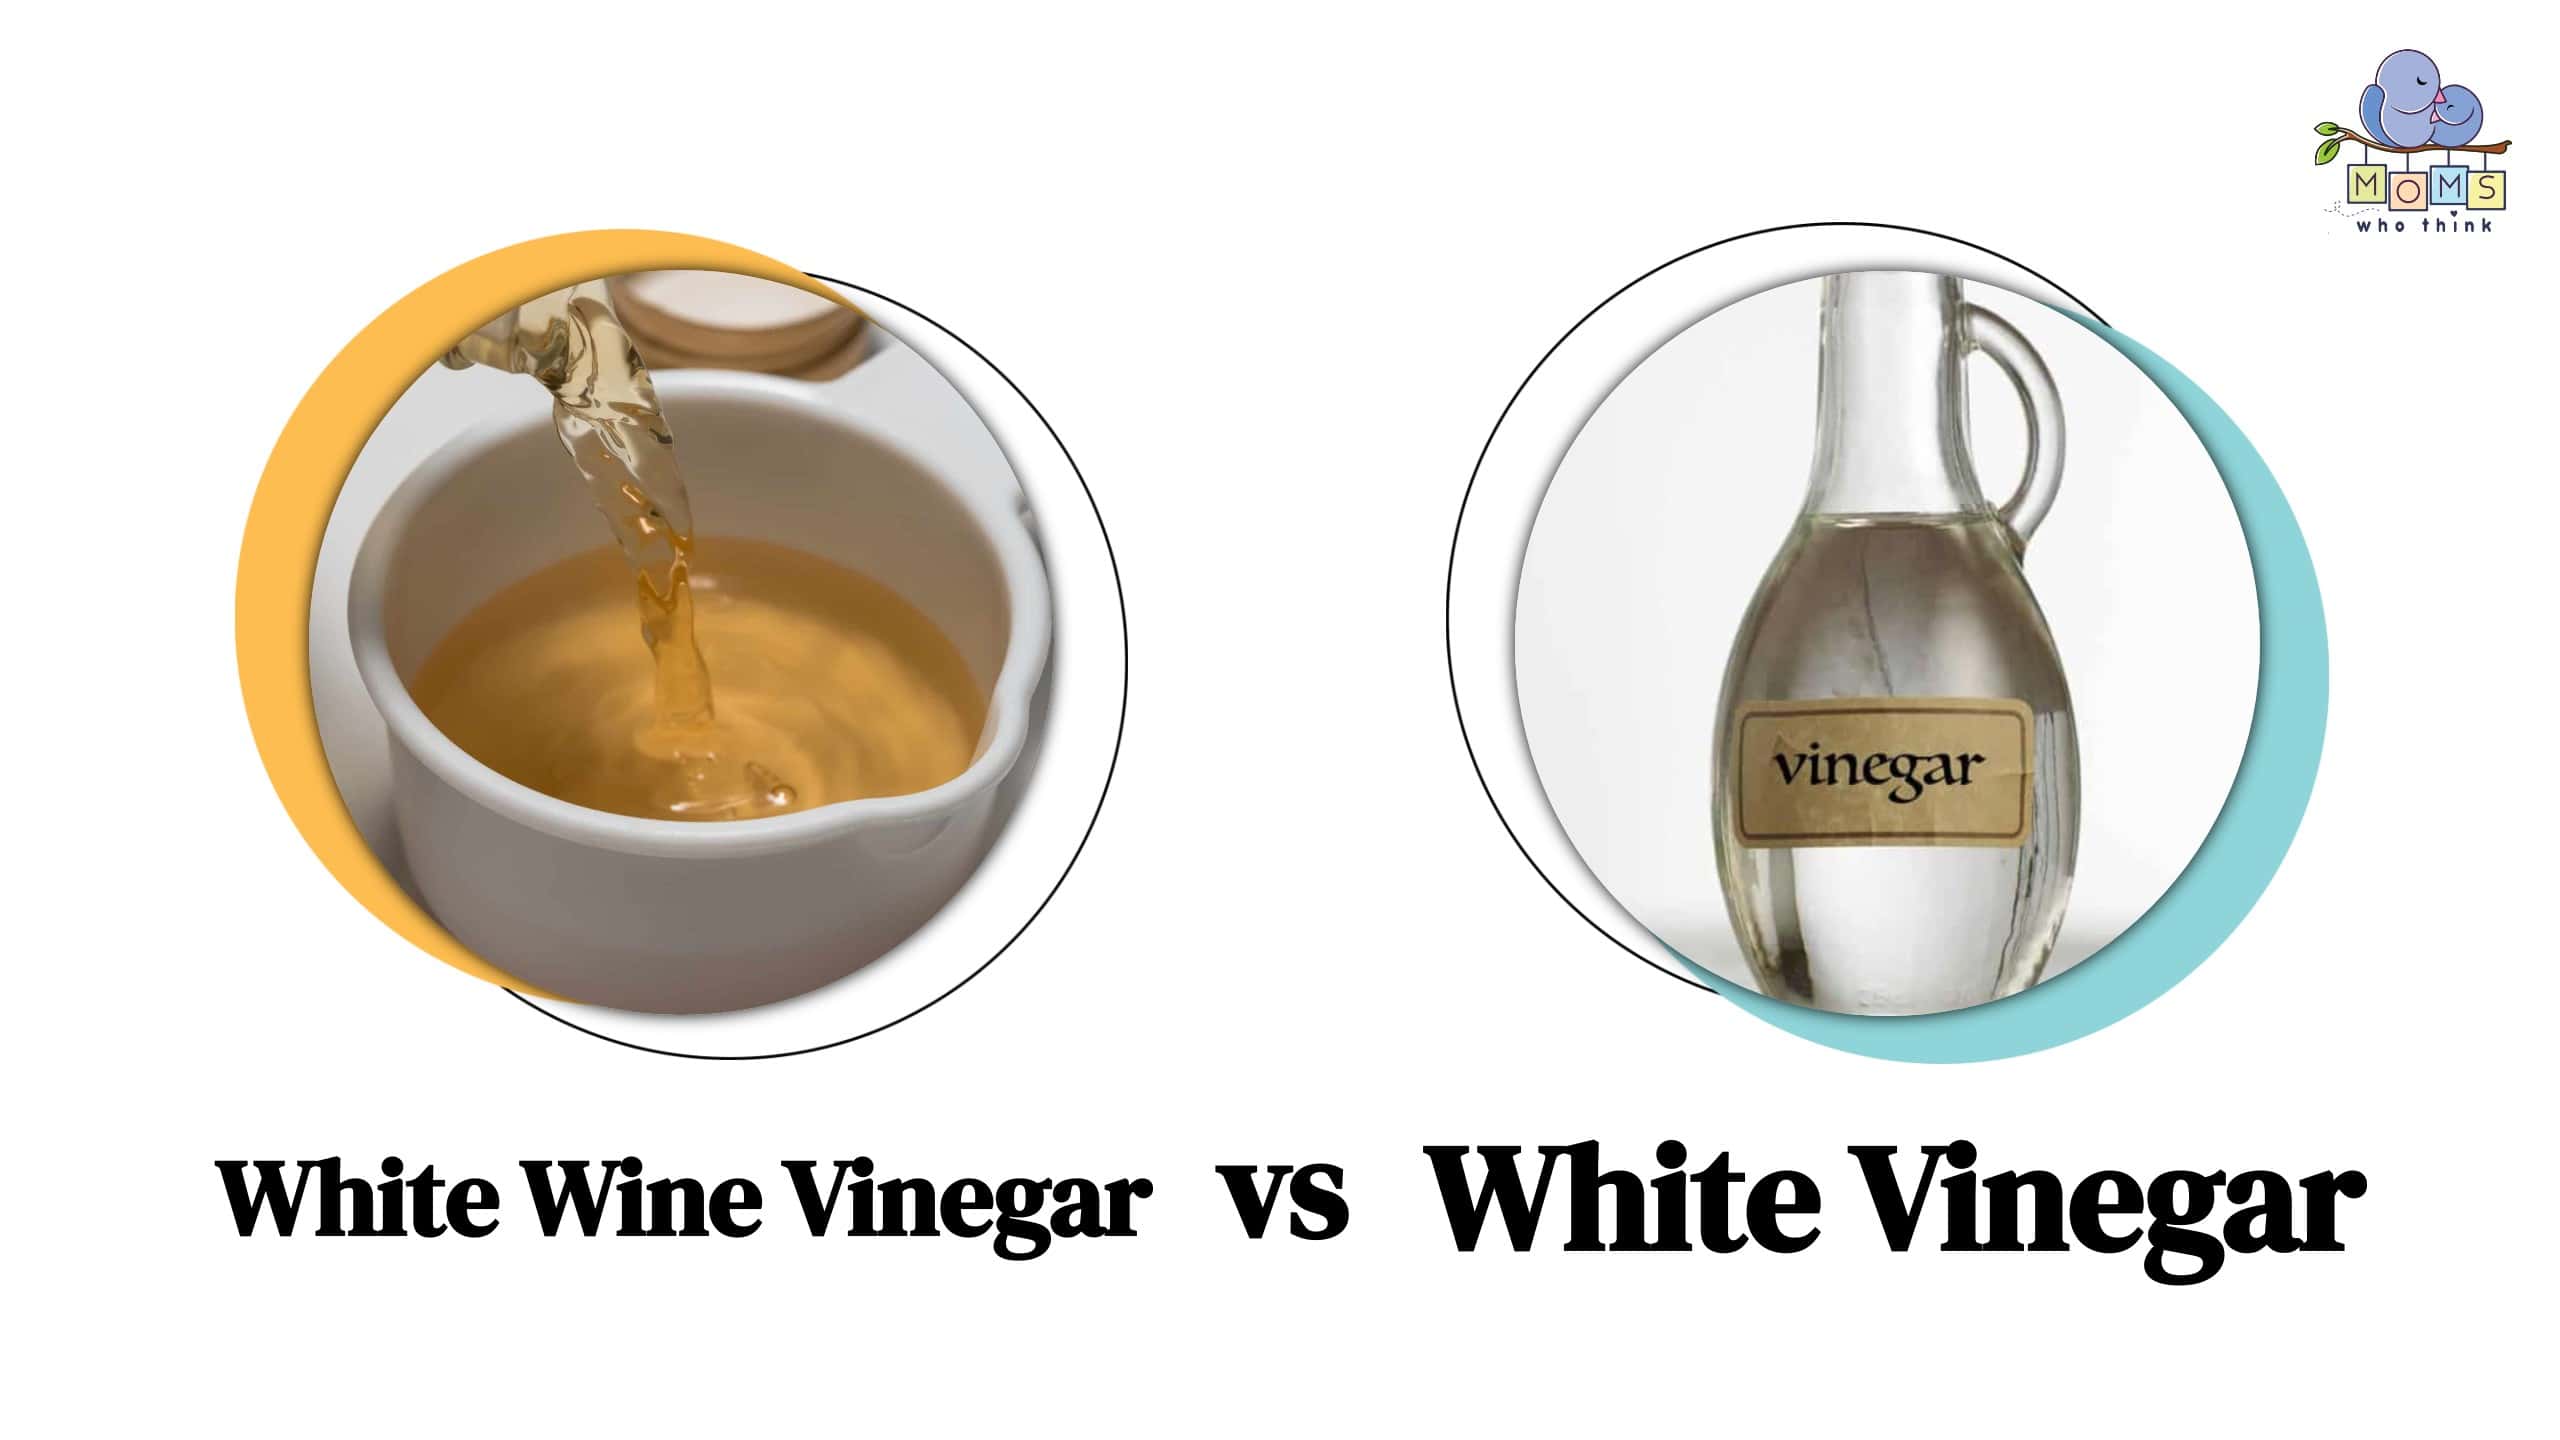 Aside from its culinary uses, white vinegar is a powerful cleaning agent. Its acidity makes it effective at removing stains, grease, and odors from various surfaces. It can be used to clean windows, countertops, and even as a natural fabric softener. The antibacterial properties of white vinegar also make it an excellent disinfectant for cleaning kitchen and bathroom surfaces.